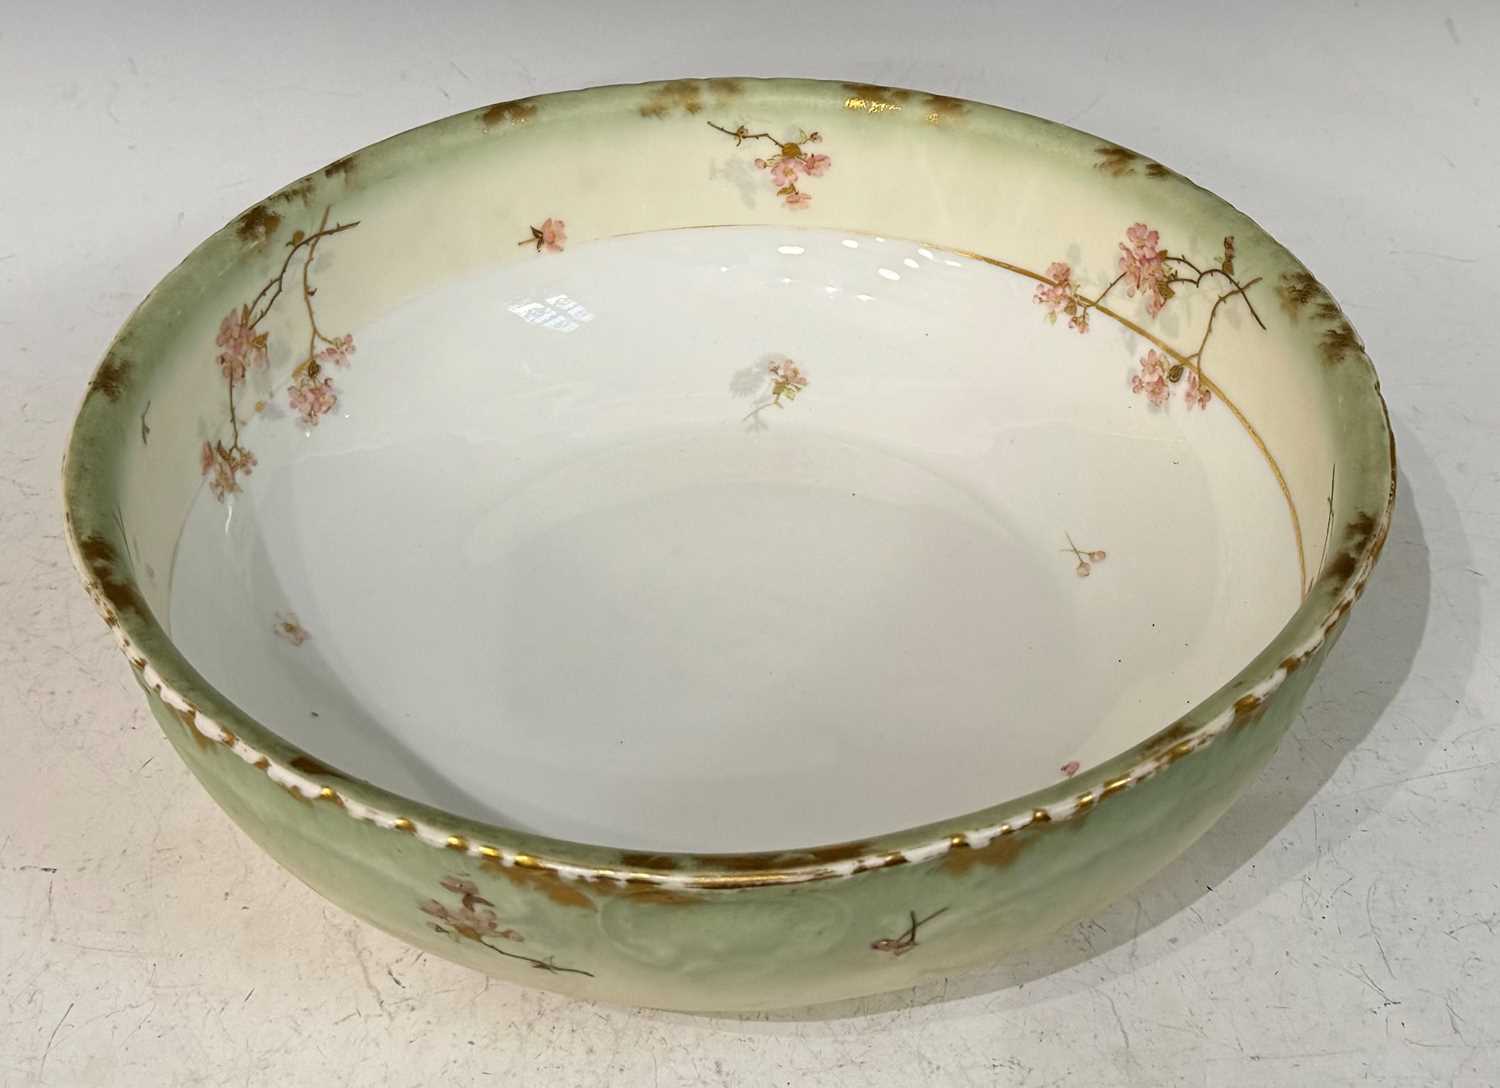 A large Limoges porcelain wash basin with hand-painted details of dog roses and gilded accents,